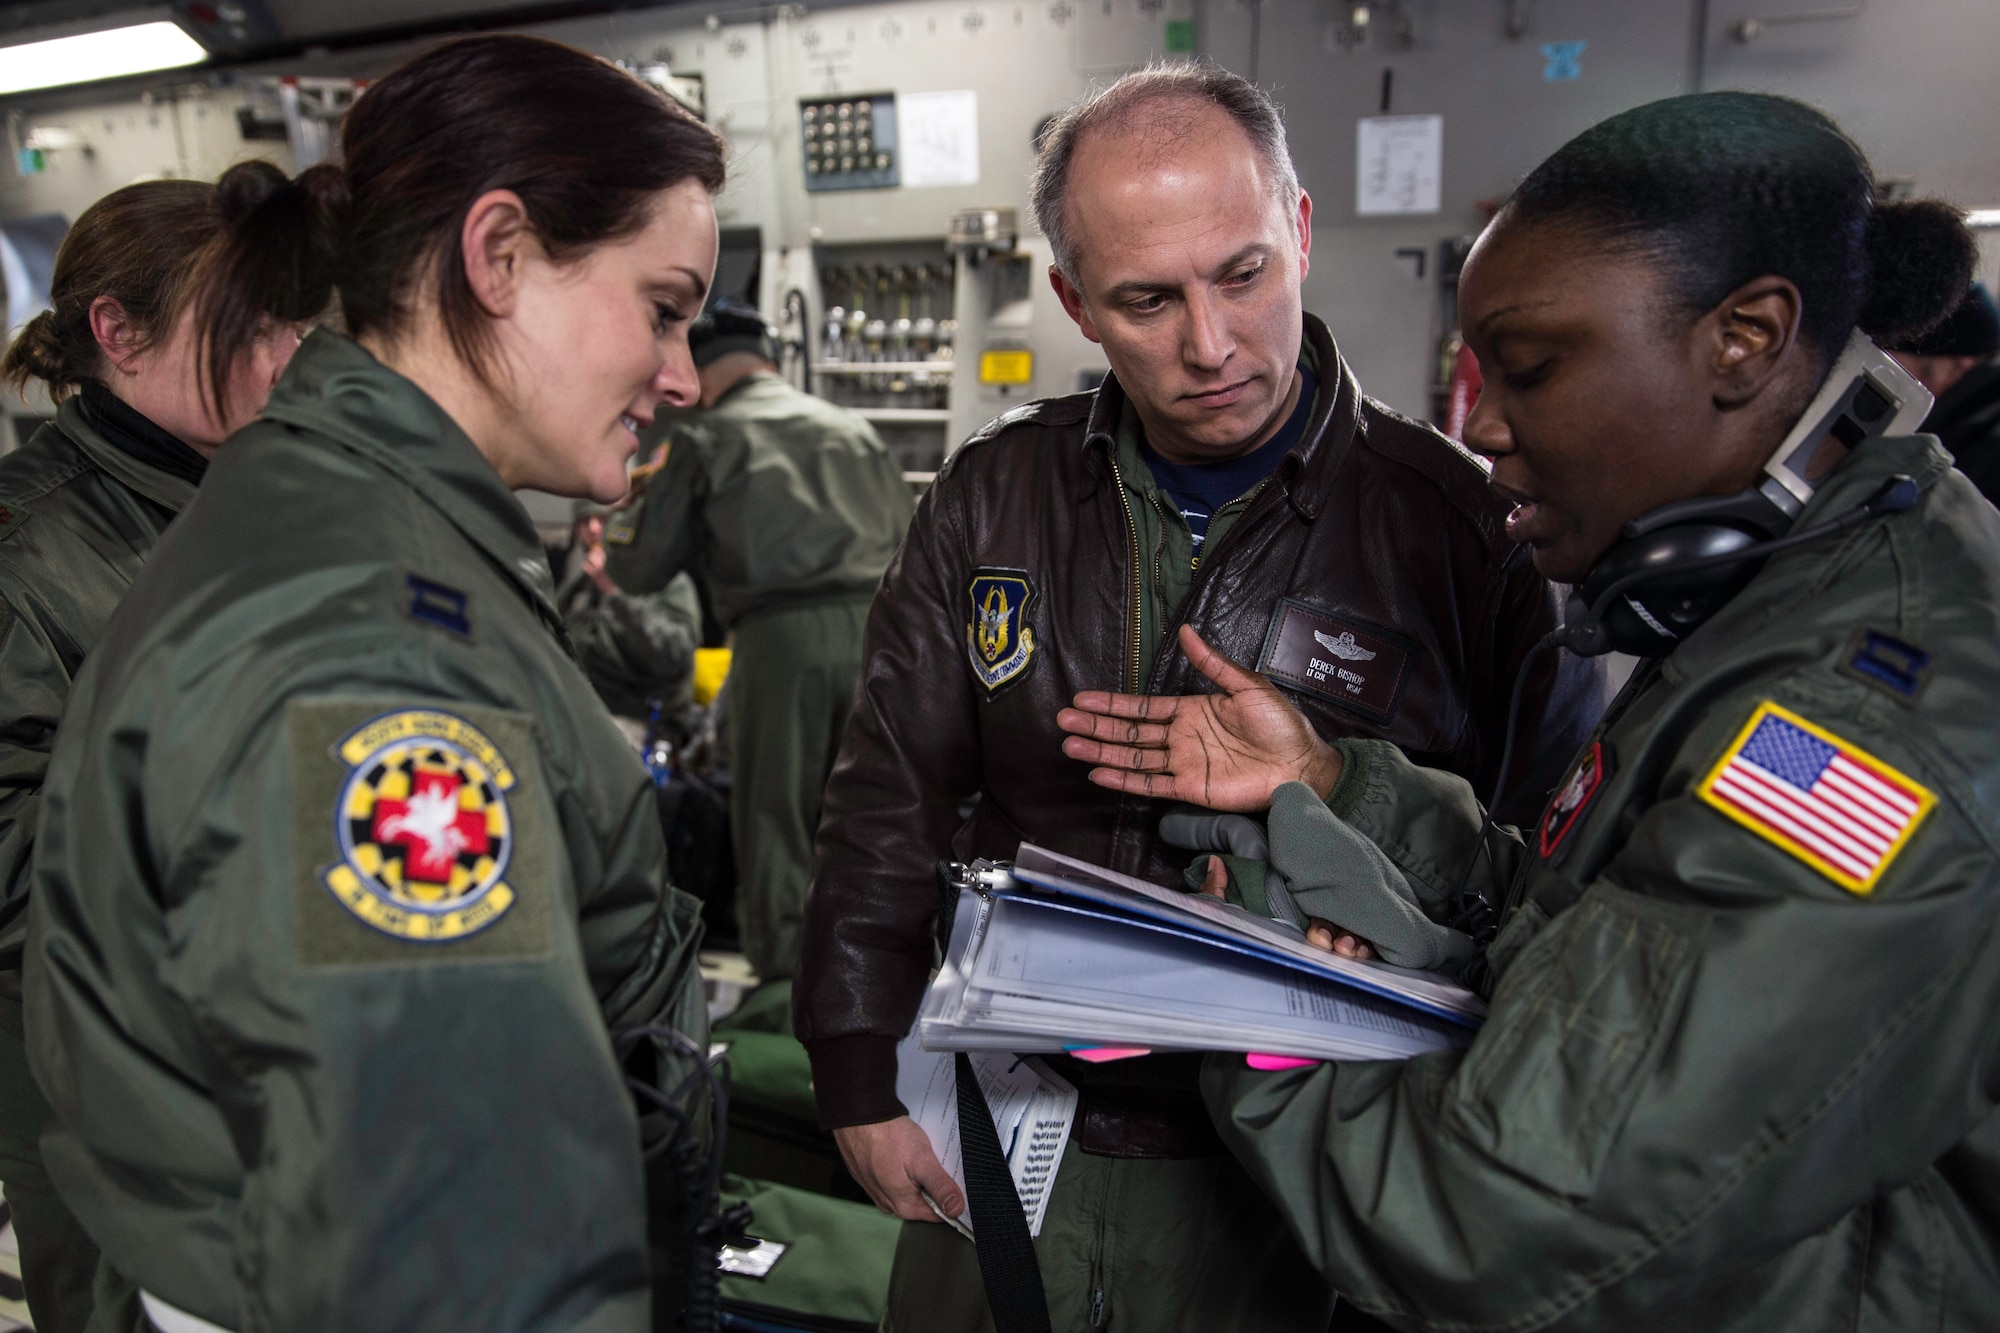 Lt. Col. Derek Bishop reviews the day’s aeromedical plan with Capt. Katie Pittinger and Capt. Elizabeth Kotey prior to taking flight Feb. 21, 2015 during a training mission in San Juan, Puerto Rico. The training mission was part of a three day fly-away with Airmen from the 315th Airlift Wing at Joint Base Charleston, S.C. and aeromedical Airmen from the 459th Air Refueling Wing at Joint Base Andrews, Md. The training mission was a cost-effective means to accomplish currency items and evaluations for flight crew members and provided C-17 familiarization and proficiency training for aeromedical Airmen. Bishop is the 315th AW safety chief and aircraft commander for the mission, and Pittinger and Kotey are both flight nurses with the 459th Aeromedical Evacuation Squadron (U.S. Air Force Photo/Tech. Sgt. Shane Ellis)